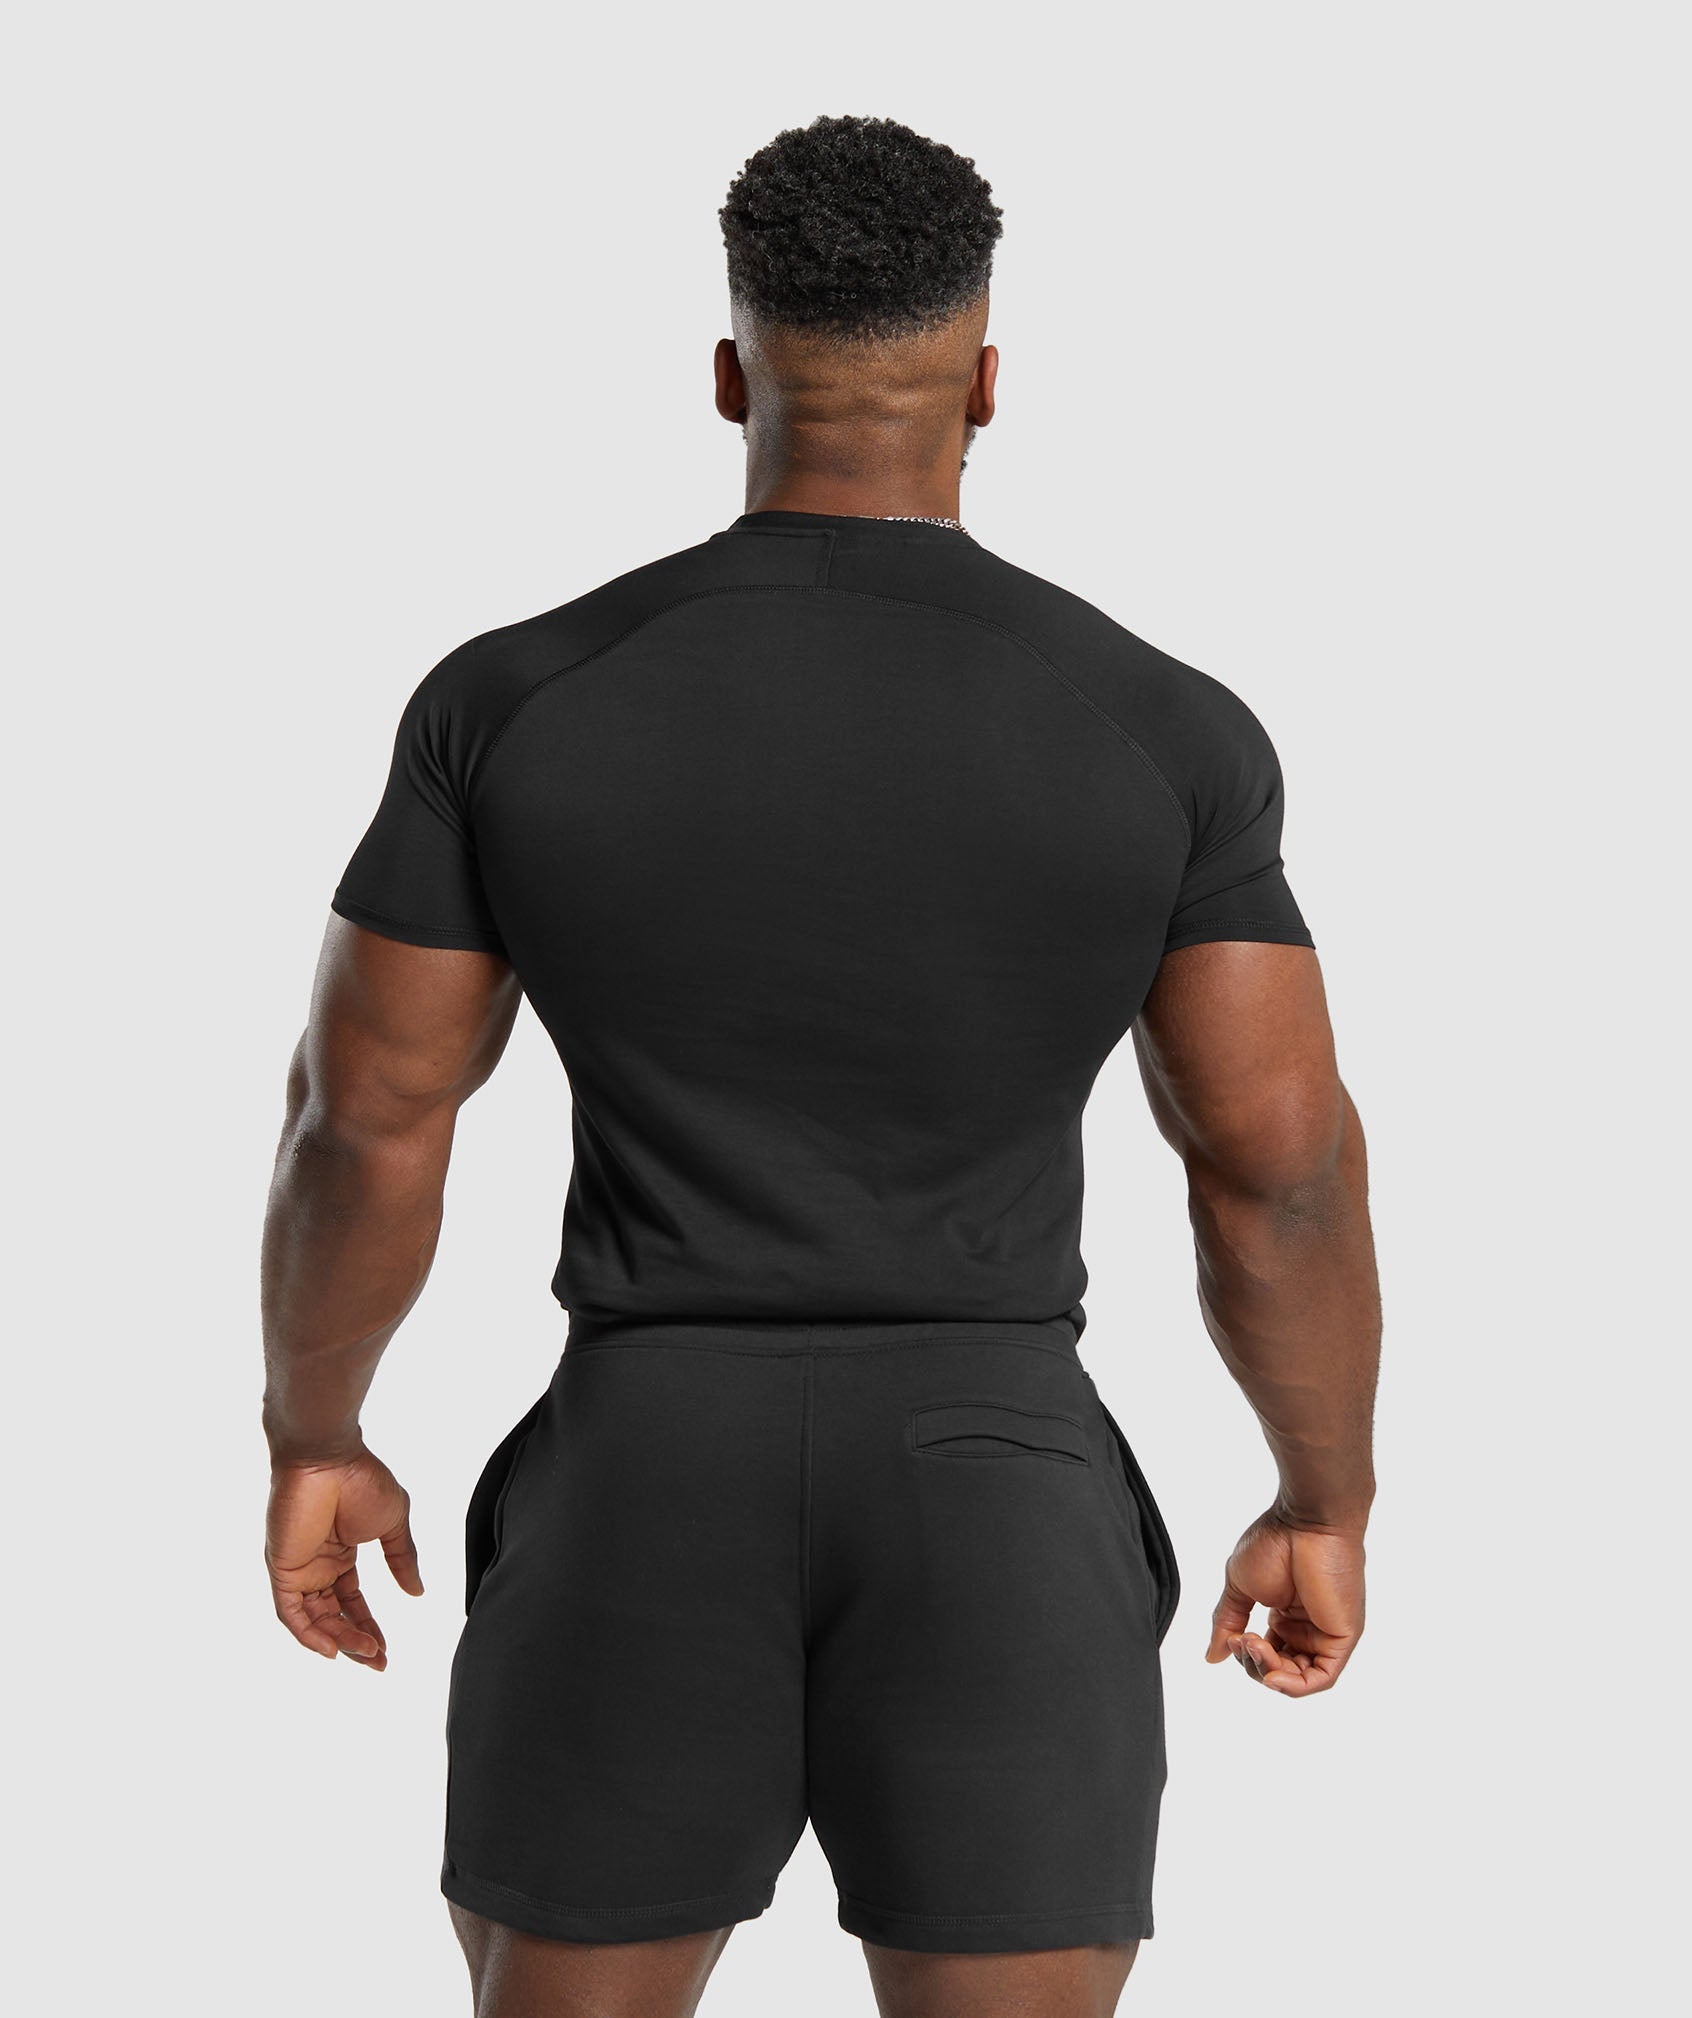 Impact Muscle T-Shirt in Black - view 2